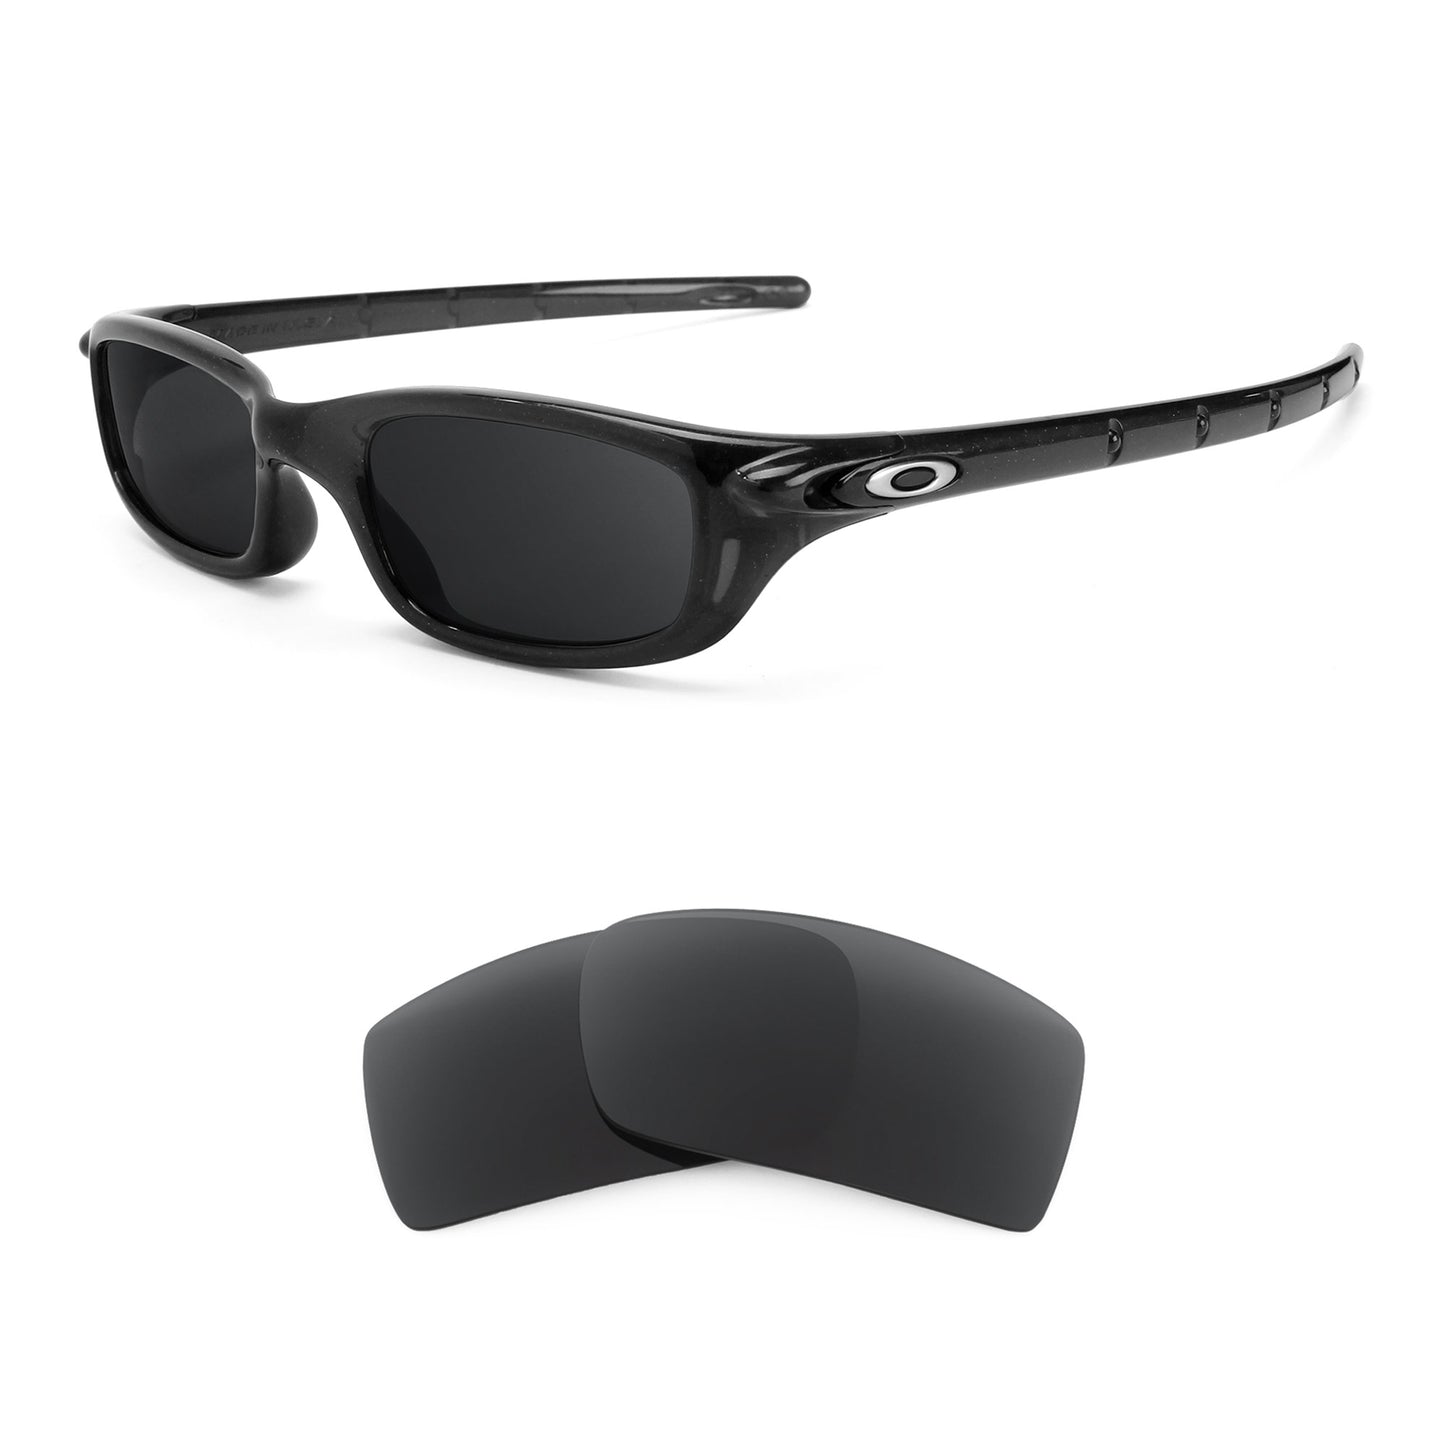 Oakley Four sunglasses with replacement lenses